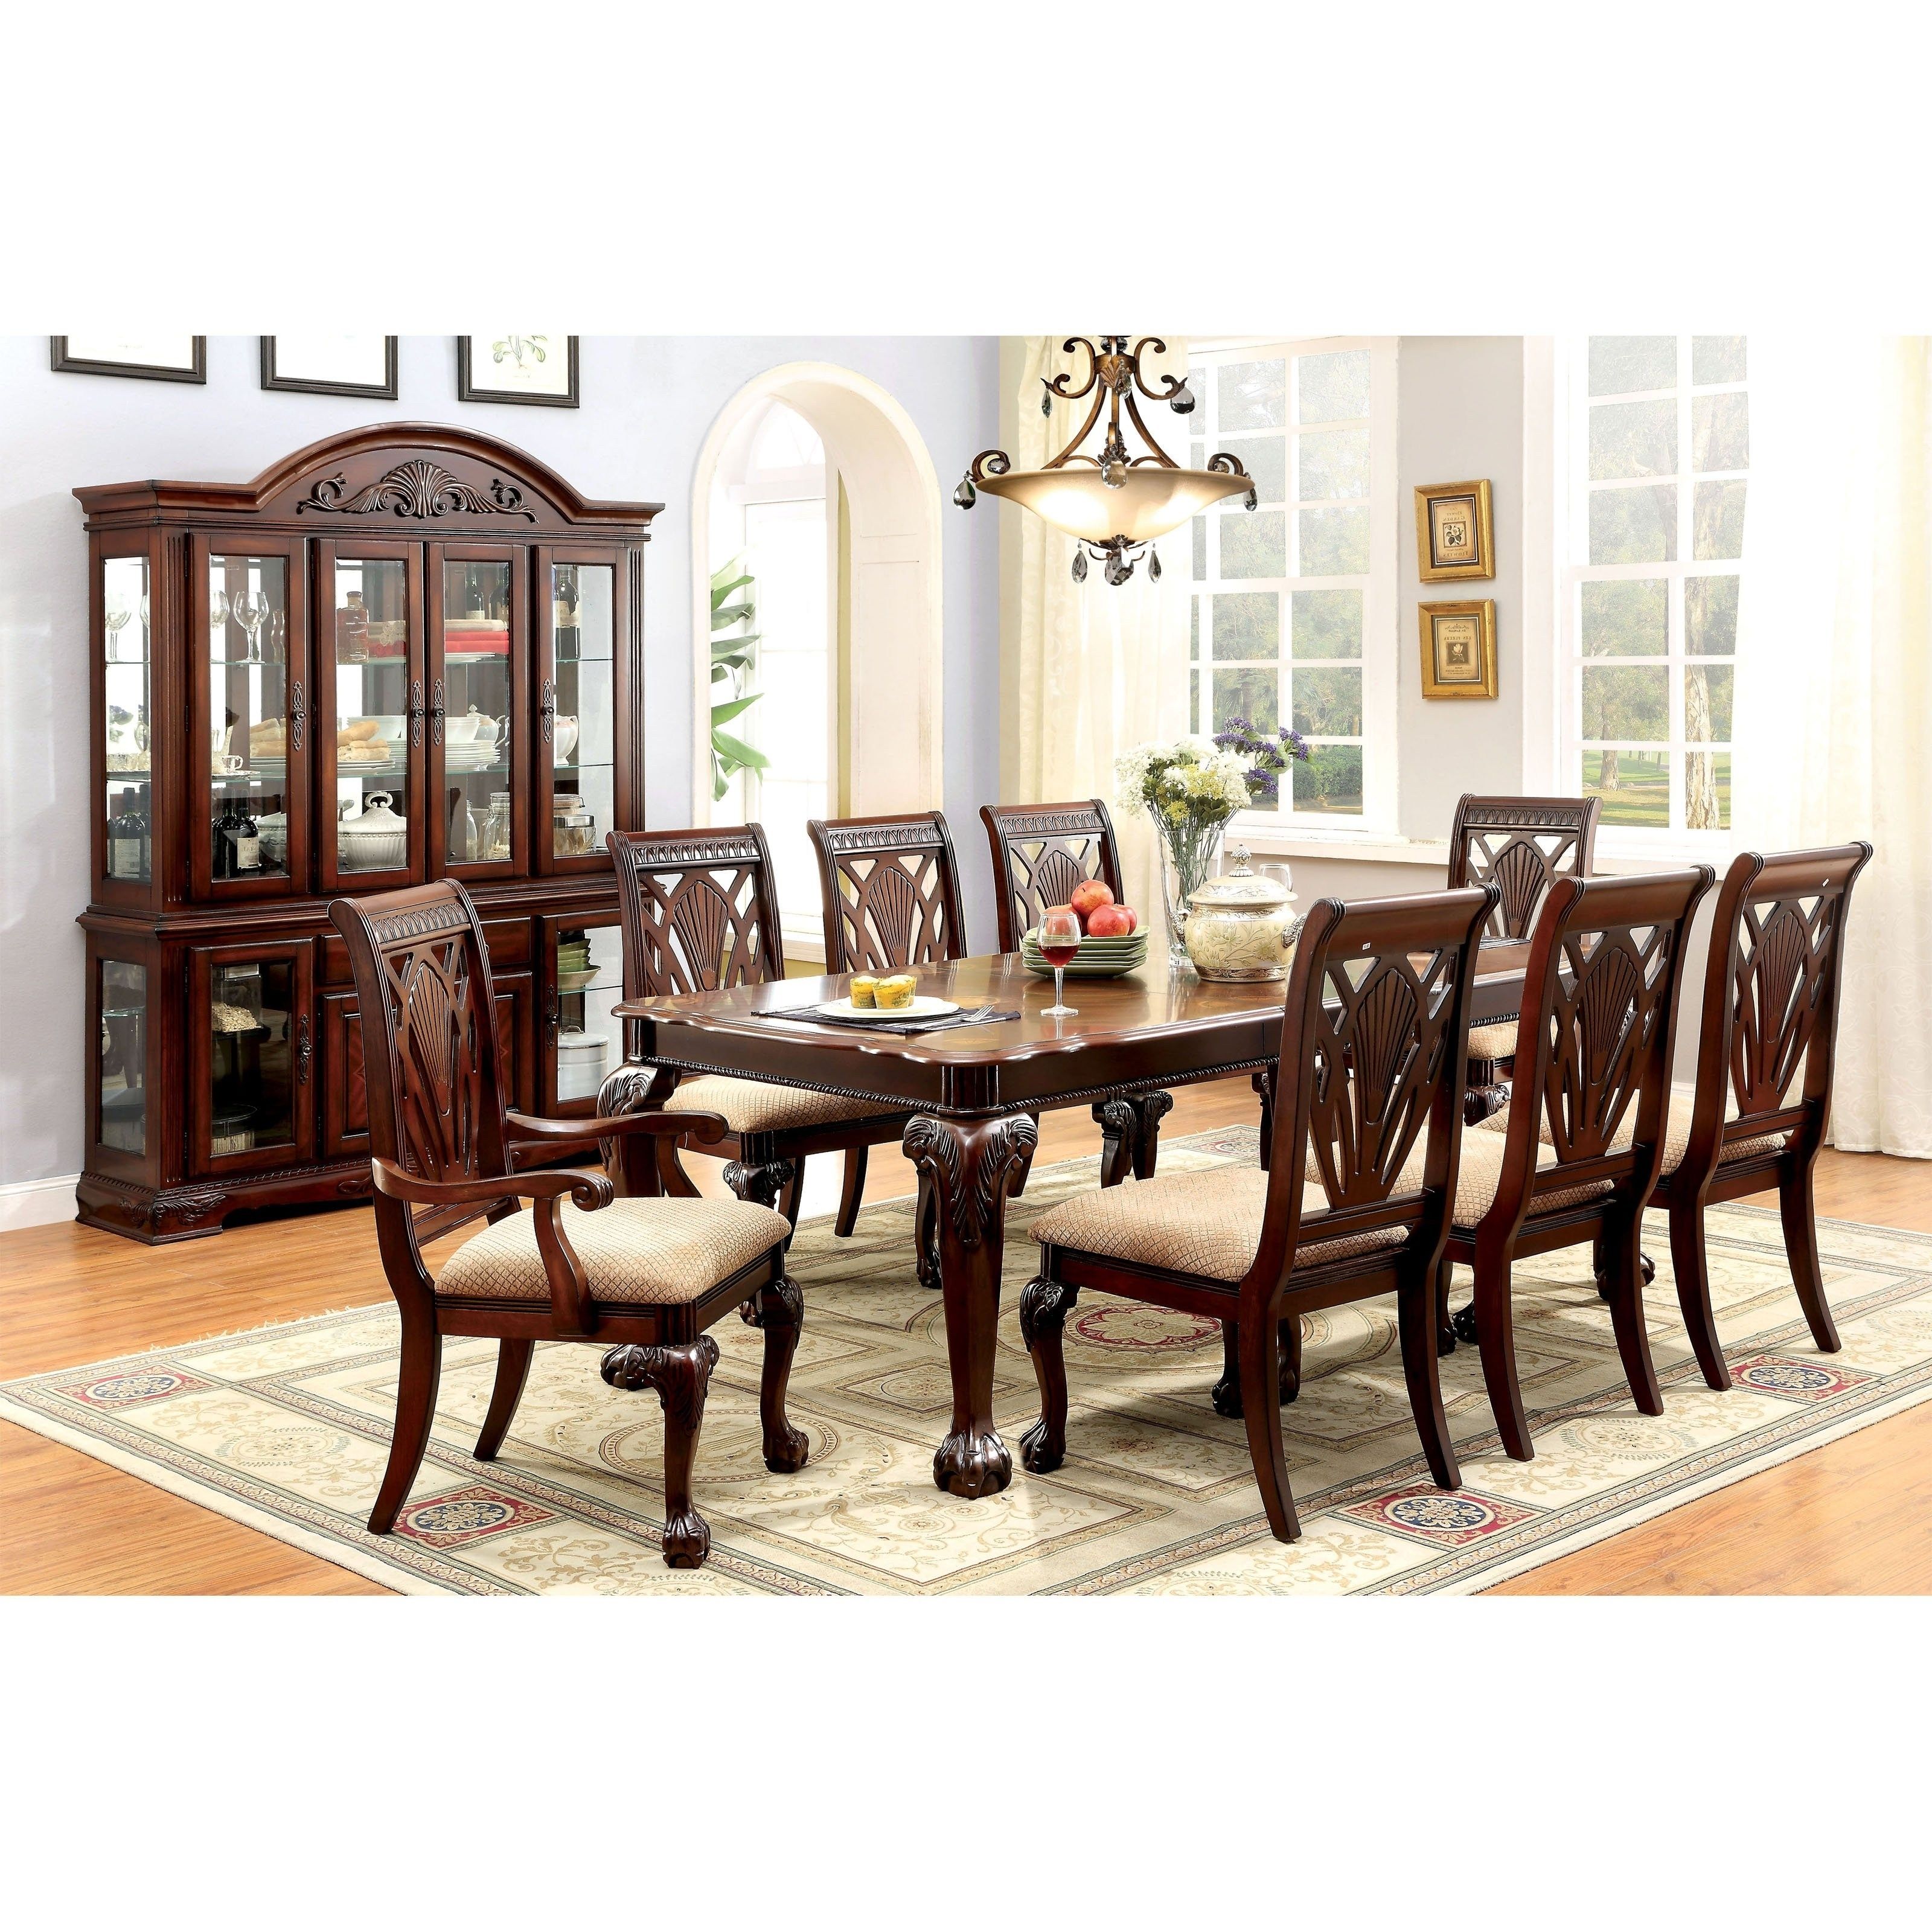 Cheery Caira Piece Extension Set Back Chairs Caira Piece Extension Throughout Latest Chapleau Ii 9 Piece Extension Dining Tables With Side Chairs (View 15 of 20)